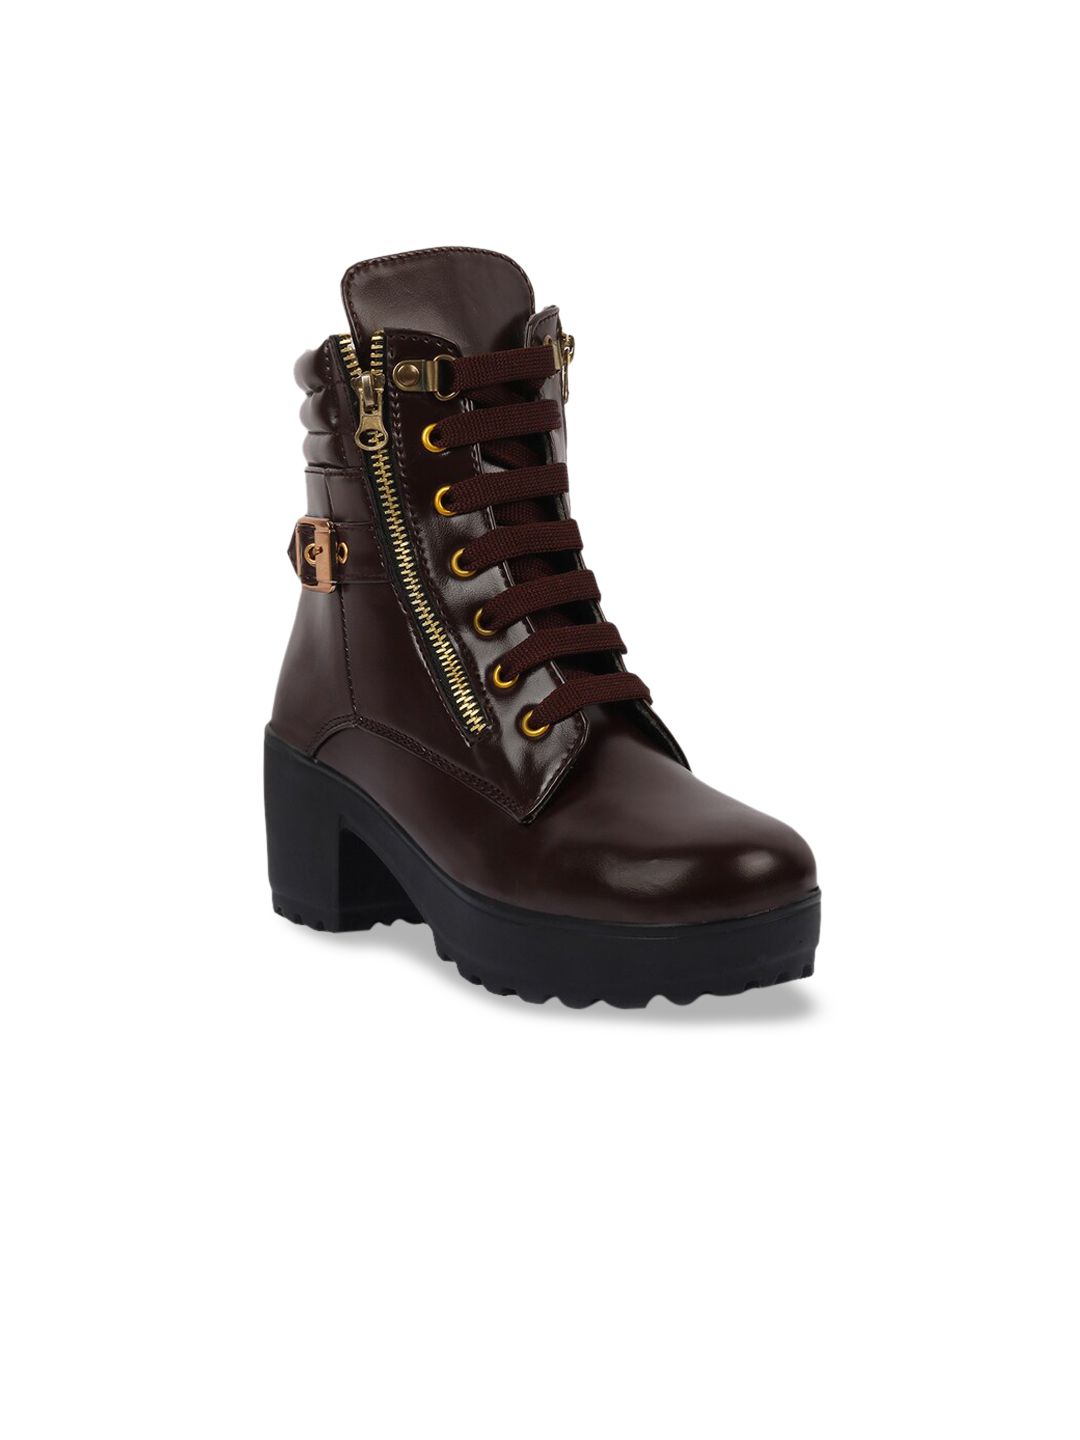 ZAPATOZ Women Brown PU Block Heeled Boots Price in India